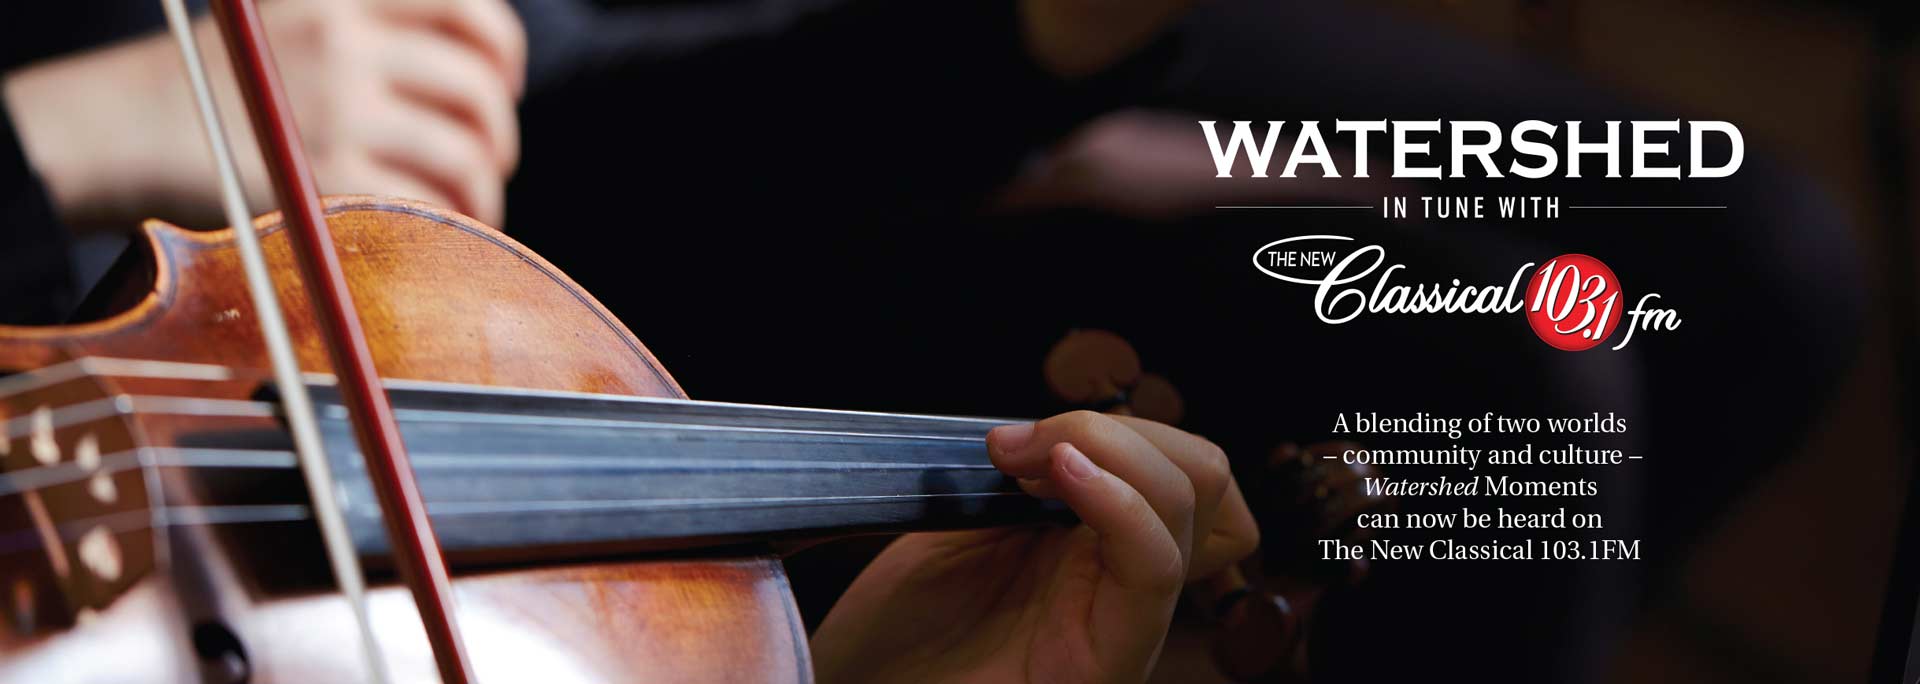 Watershed is in tune with the new Classical 103.1 FM. A blending of two worlds - community and culture - Watershed Moments can now be heard on The New Classical 103.1 FM